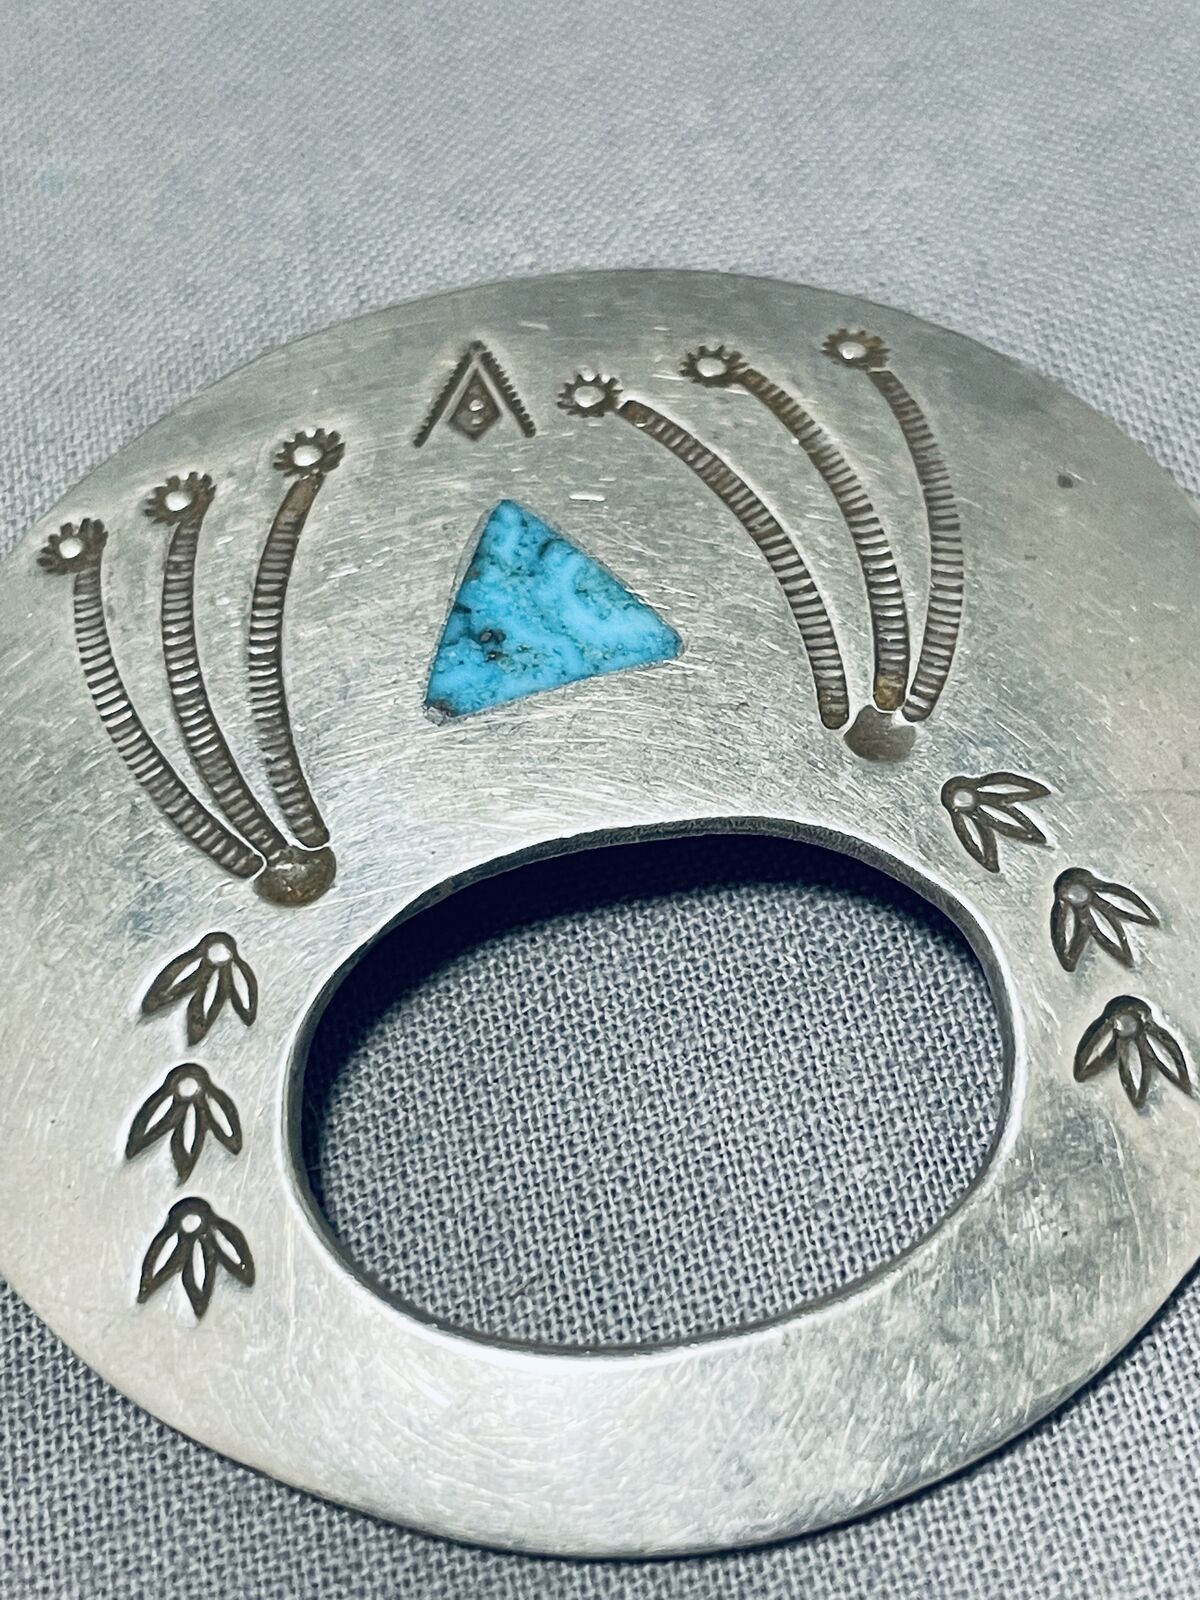 EXCEPTIONAL VINTAGE NAVAJO BLUE DIAMOND TURQUOISE STERLING SILVER PIN